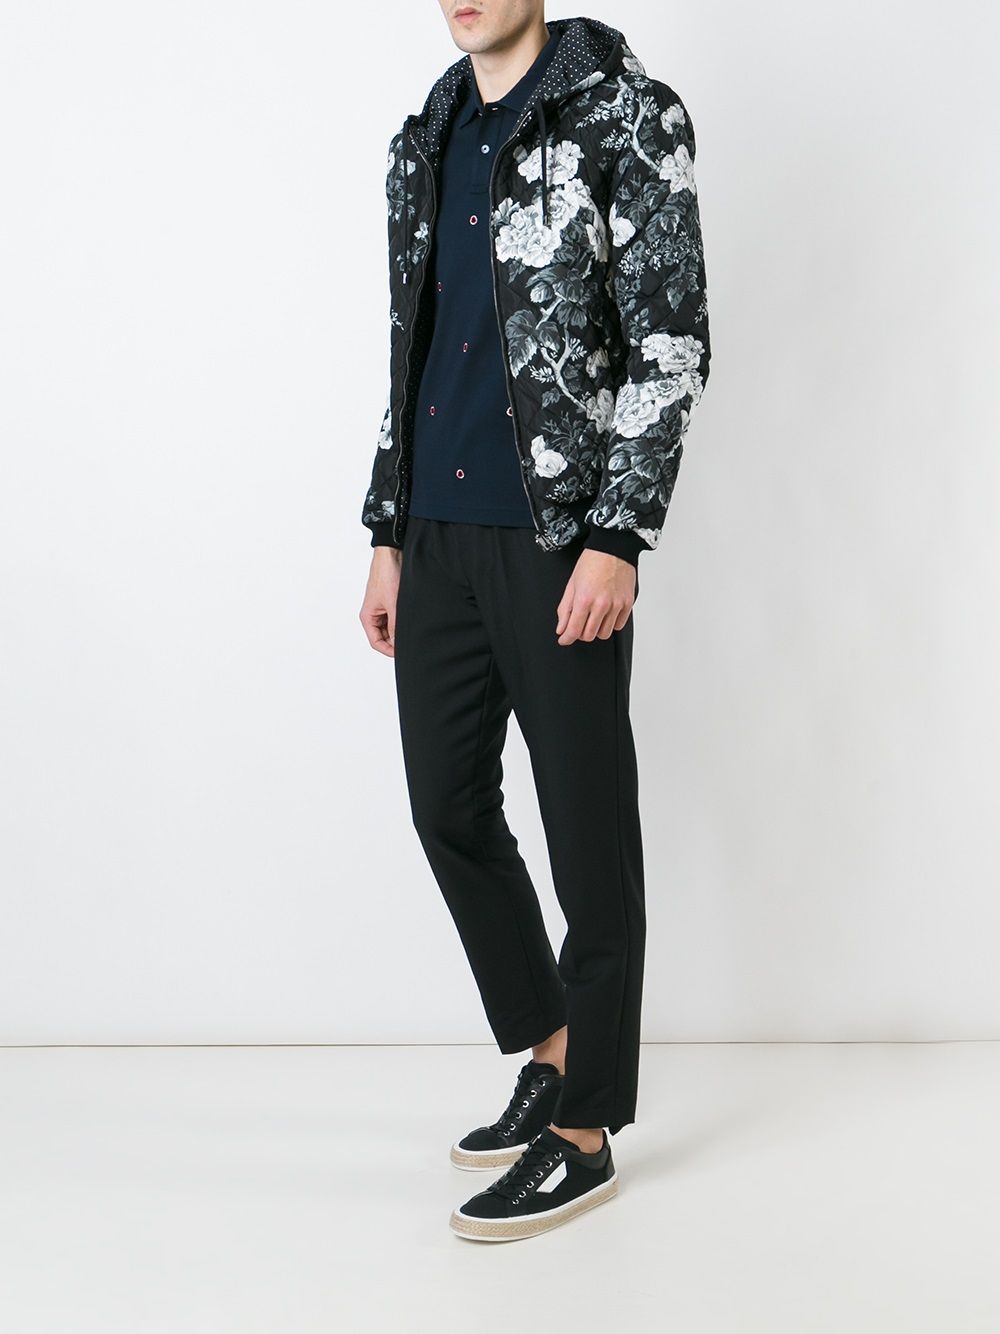 Dolce & Gabbana Floral Print Quilted Jacket - Farfetch